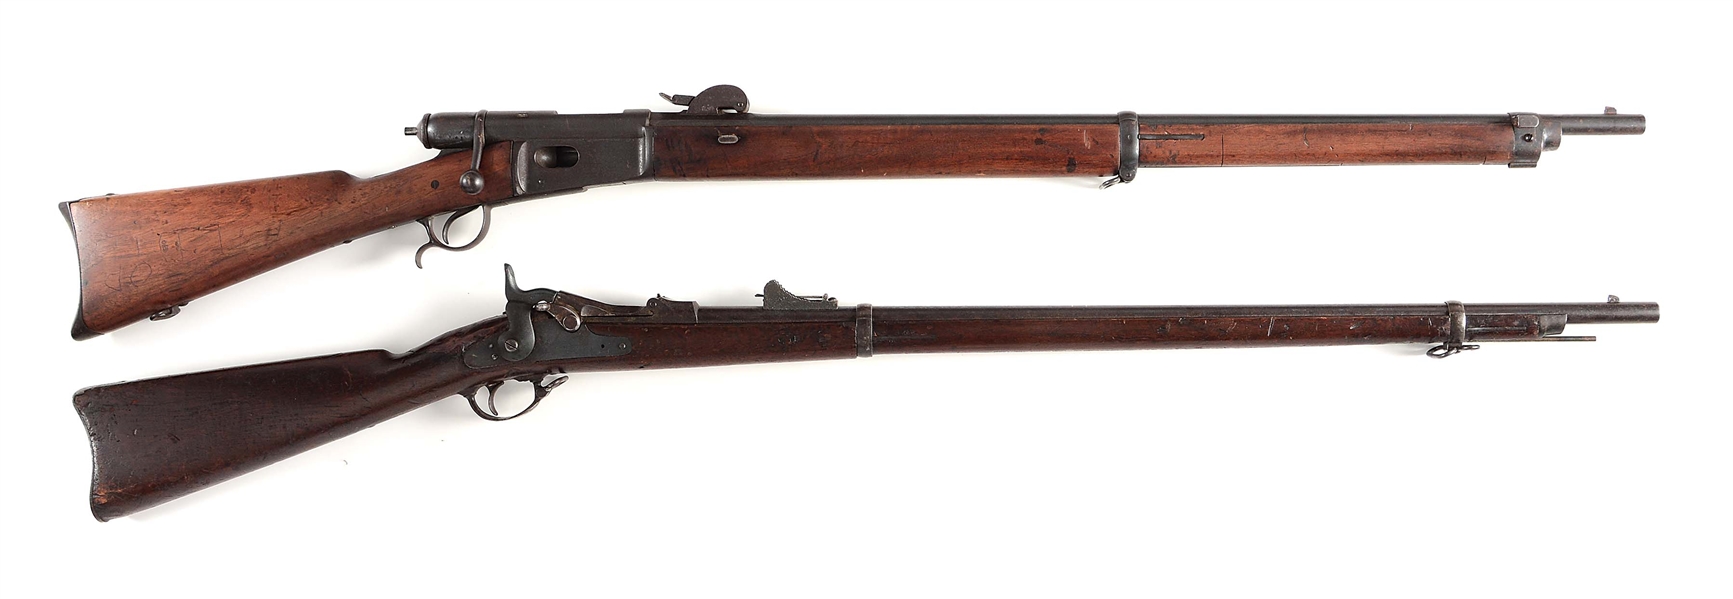 (A) LOT OF 2: SWISS VETTERLI BOLT ACTION RIFLE AND US SPRINGFIELD MODEL 1873 TRAPDOOR SINGLE SHOT RIFLE.